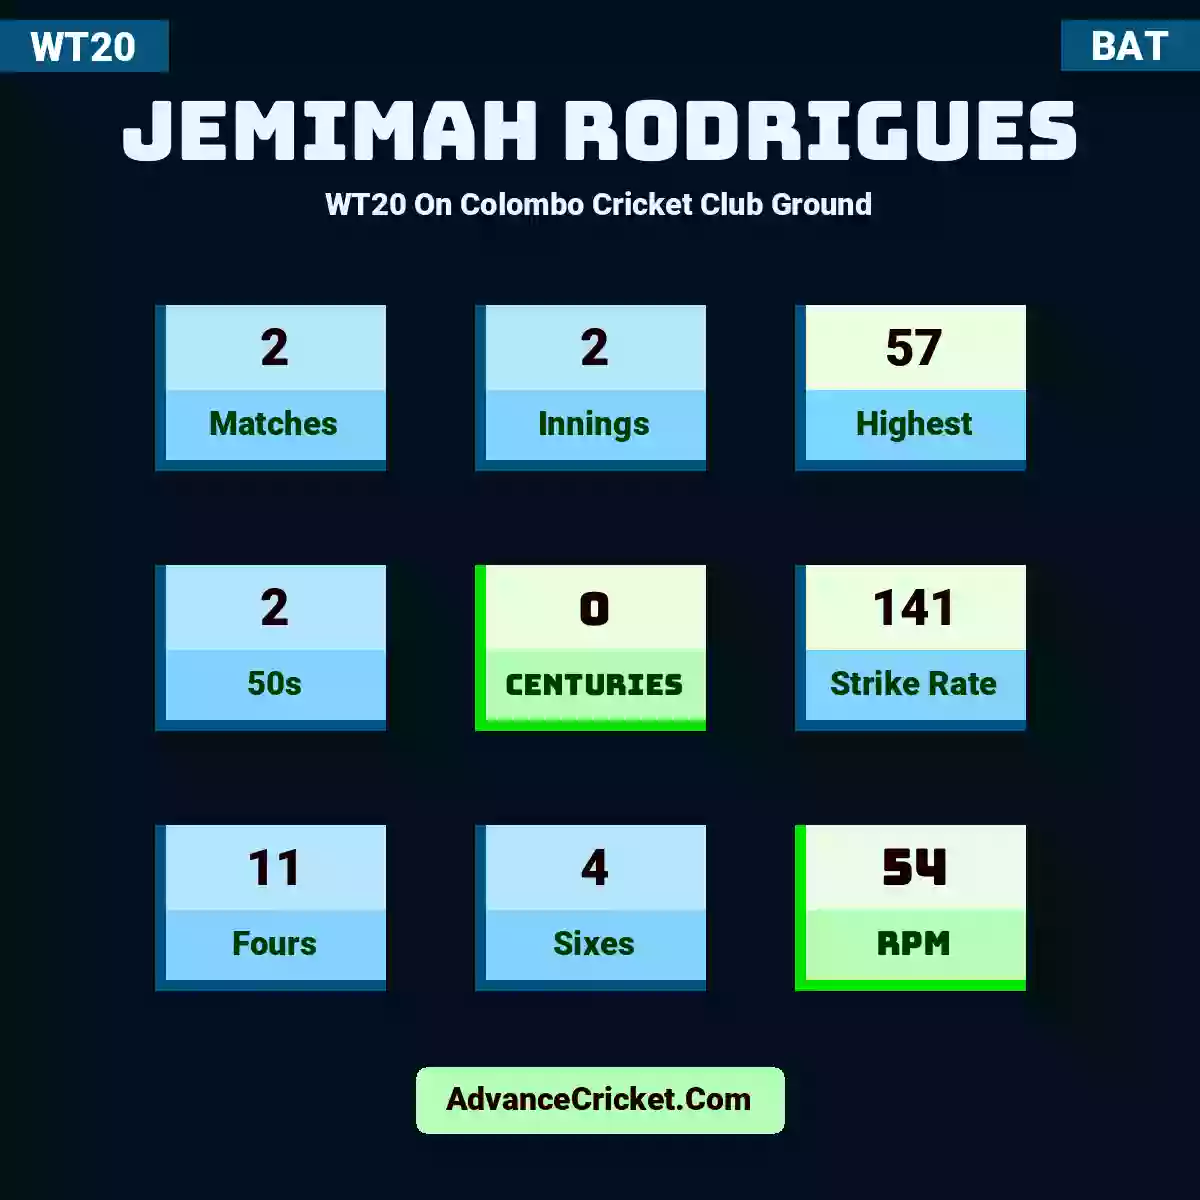 Jemimah Rodrigues WT20  On Colombo Cricket Club Ground, Jemimah Rodrigues played 2 matches, scored 57 runs as highest, 2 half-centuries, and 0 centuries, with a strike rate of 141. J.Rodrigues hit 11 fours and 4 sixes, with an RPM of 54.